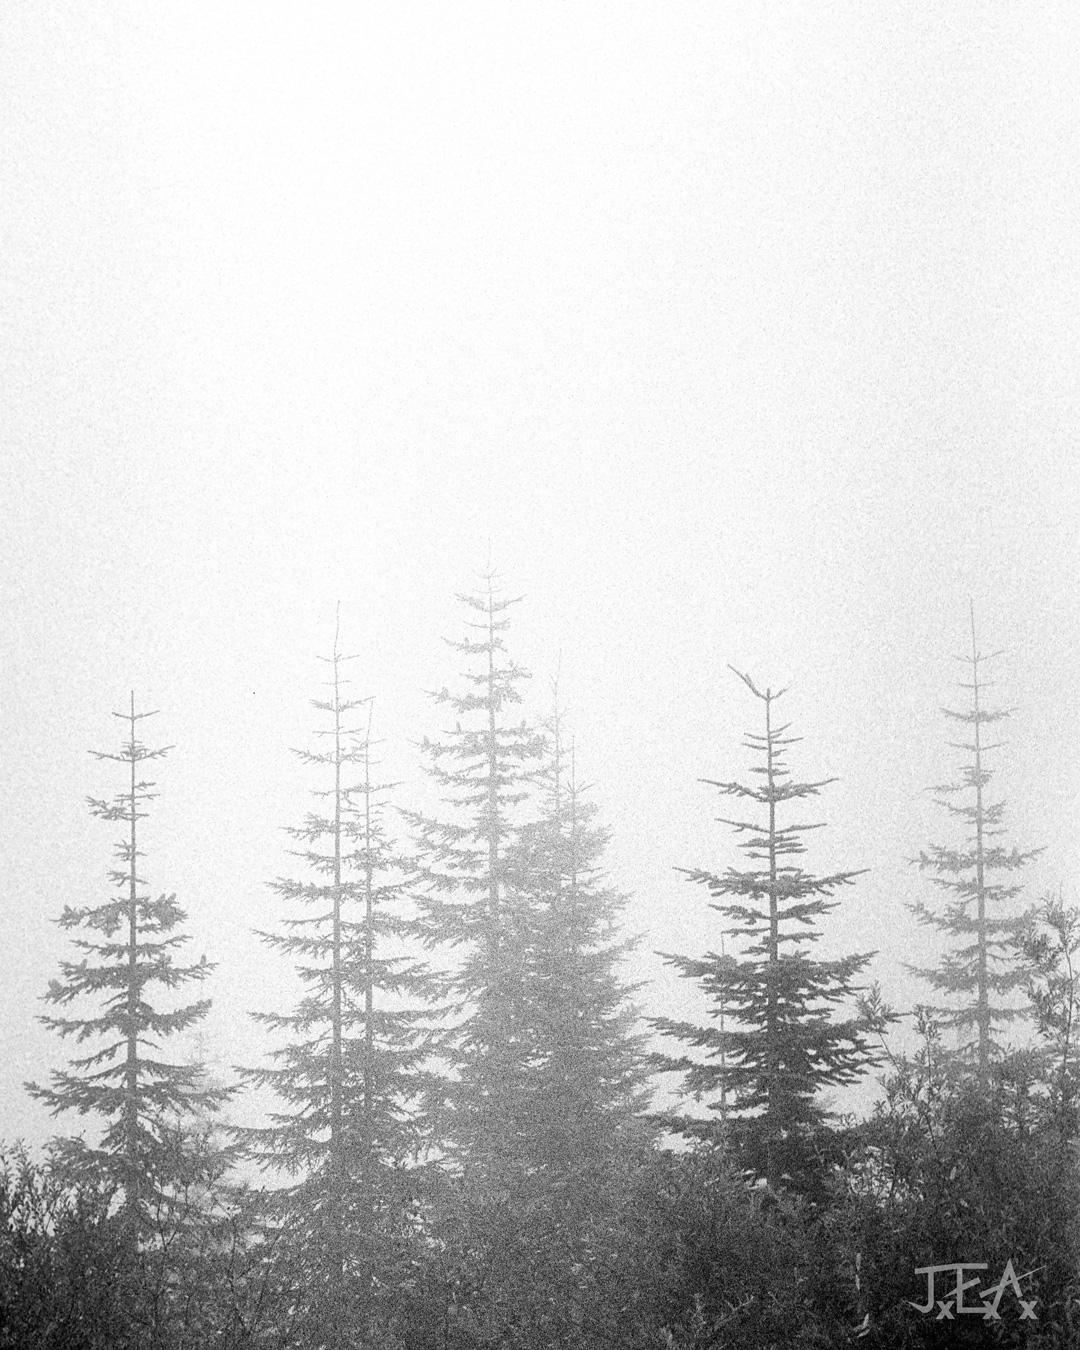 A stand of evergreens shrouded in fog and mist.